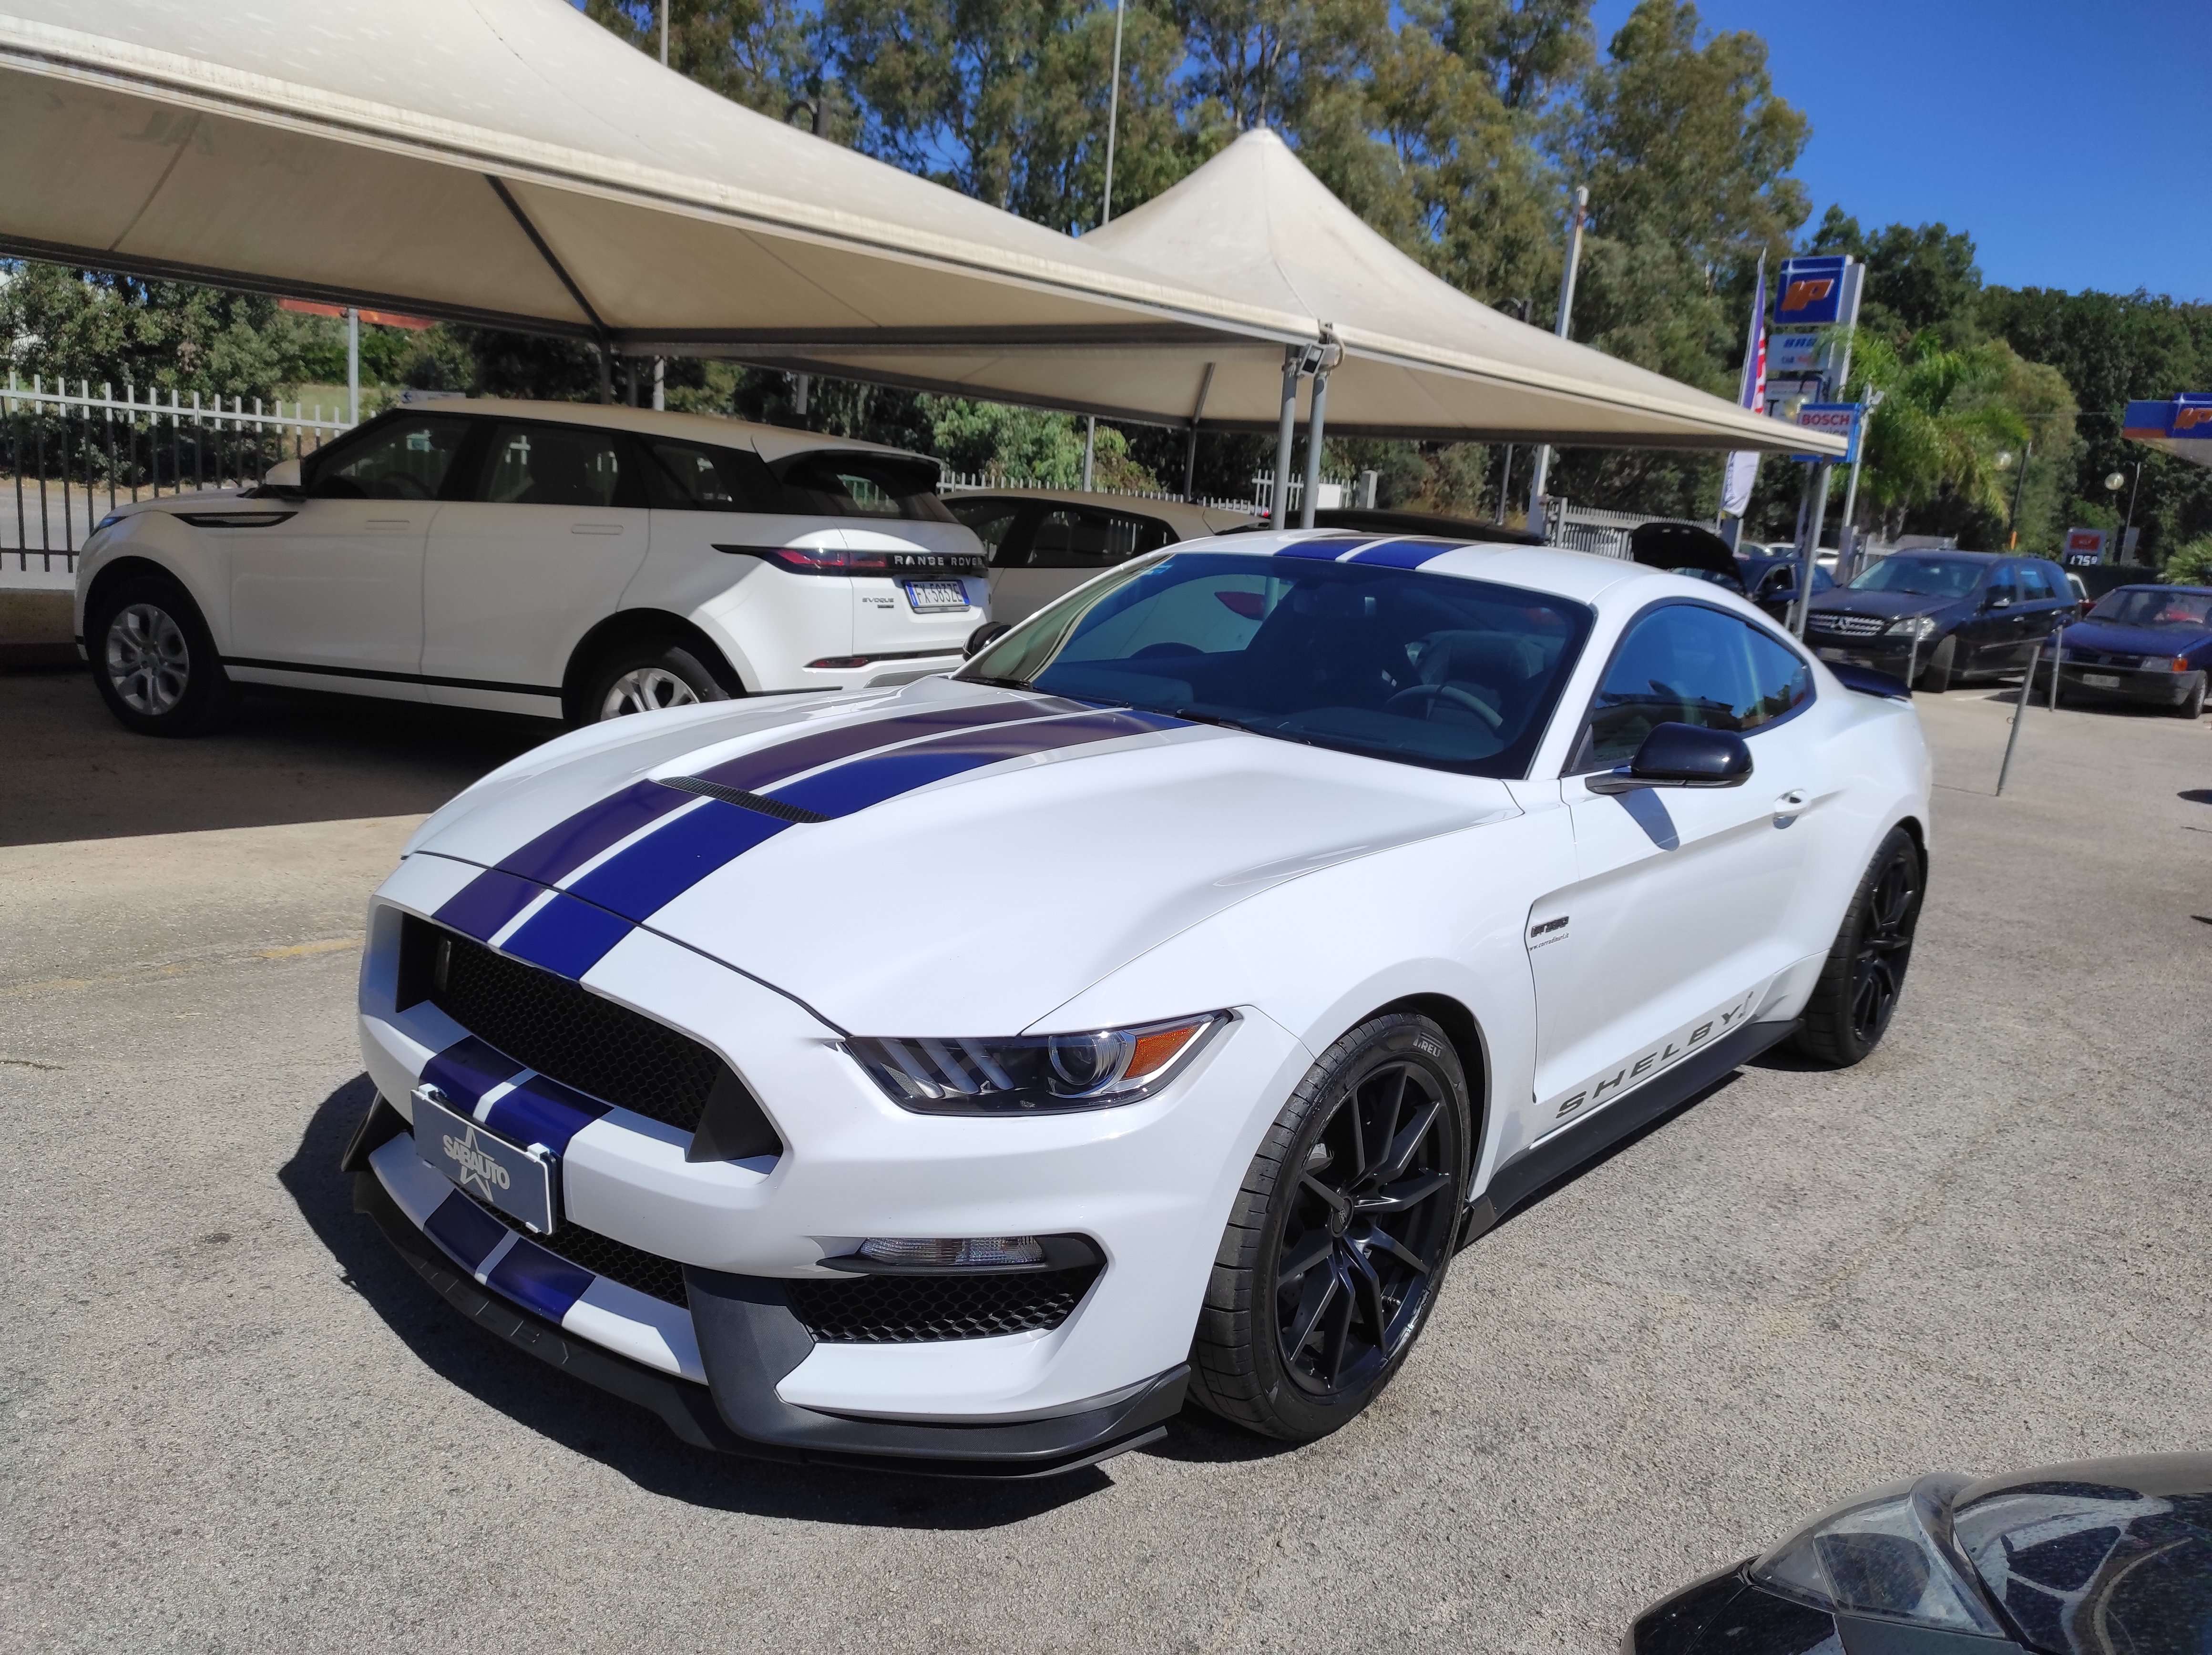 Shelby Mustang GT-H Coupe in White used in Sabaudia - Latina - LT for € 95,000.-